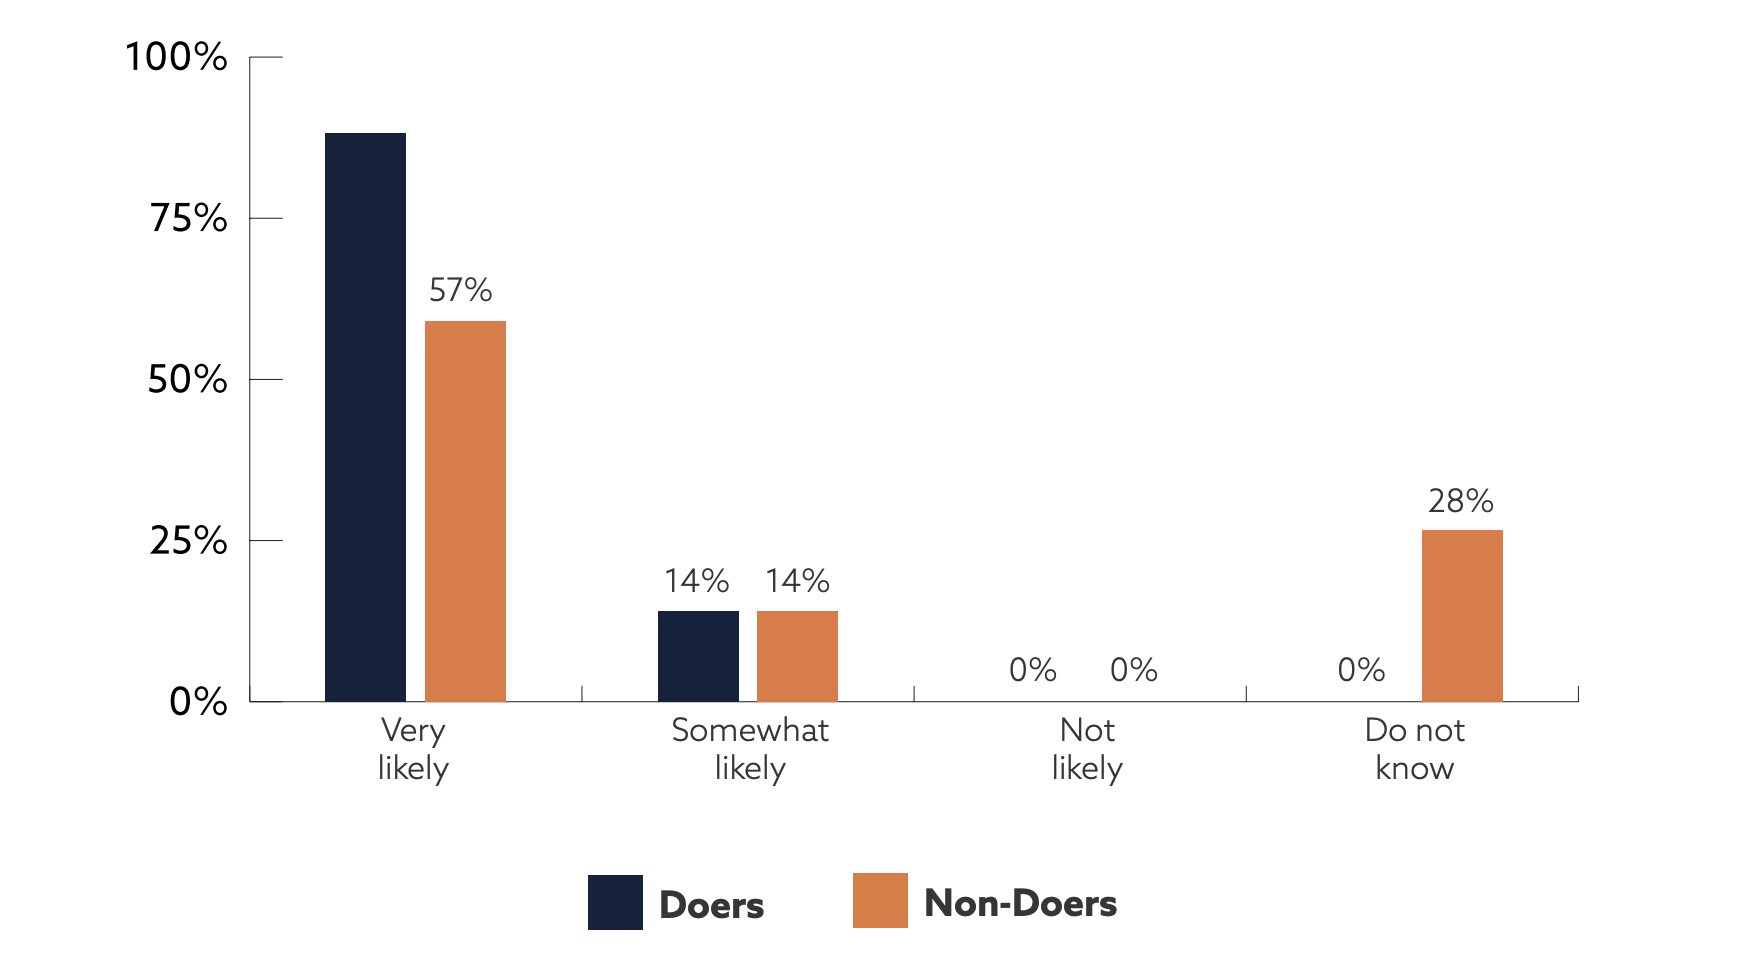 Bar chart.  Doers: Very likely (approximately) 85%; somewhat likely 14%; not likely. 0%; do not know 0%.  Non-doers: Very likely 57%; somewhat likely 14%; not likely. 0%; do not know 28%. 